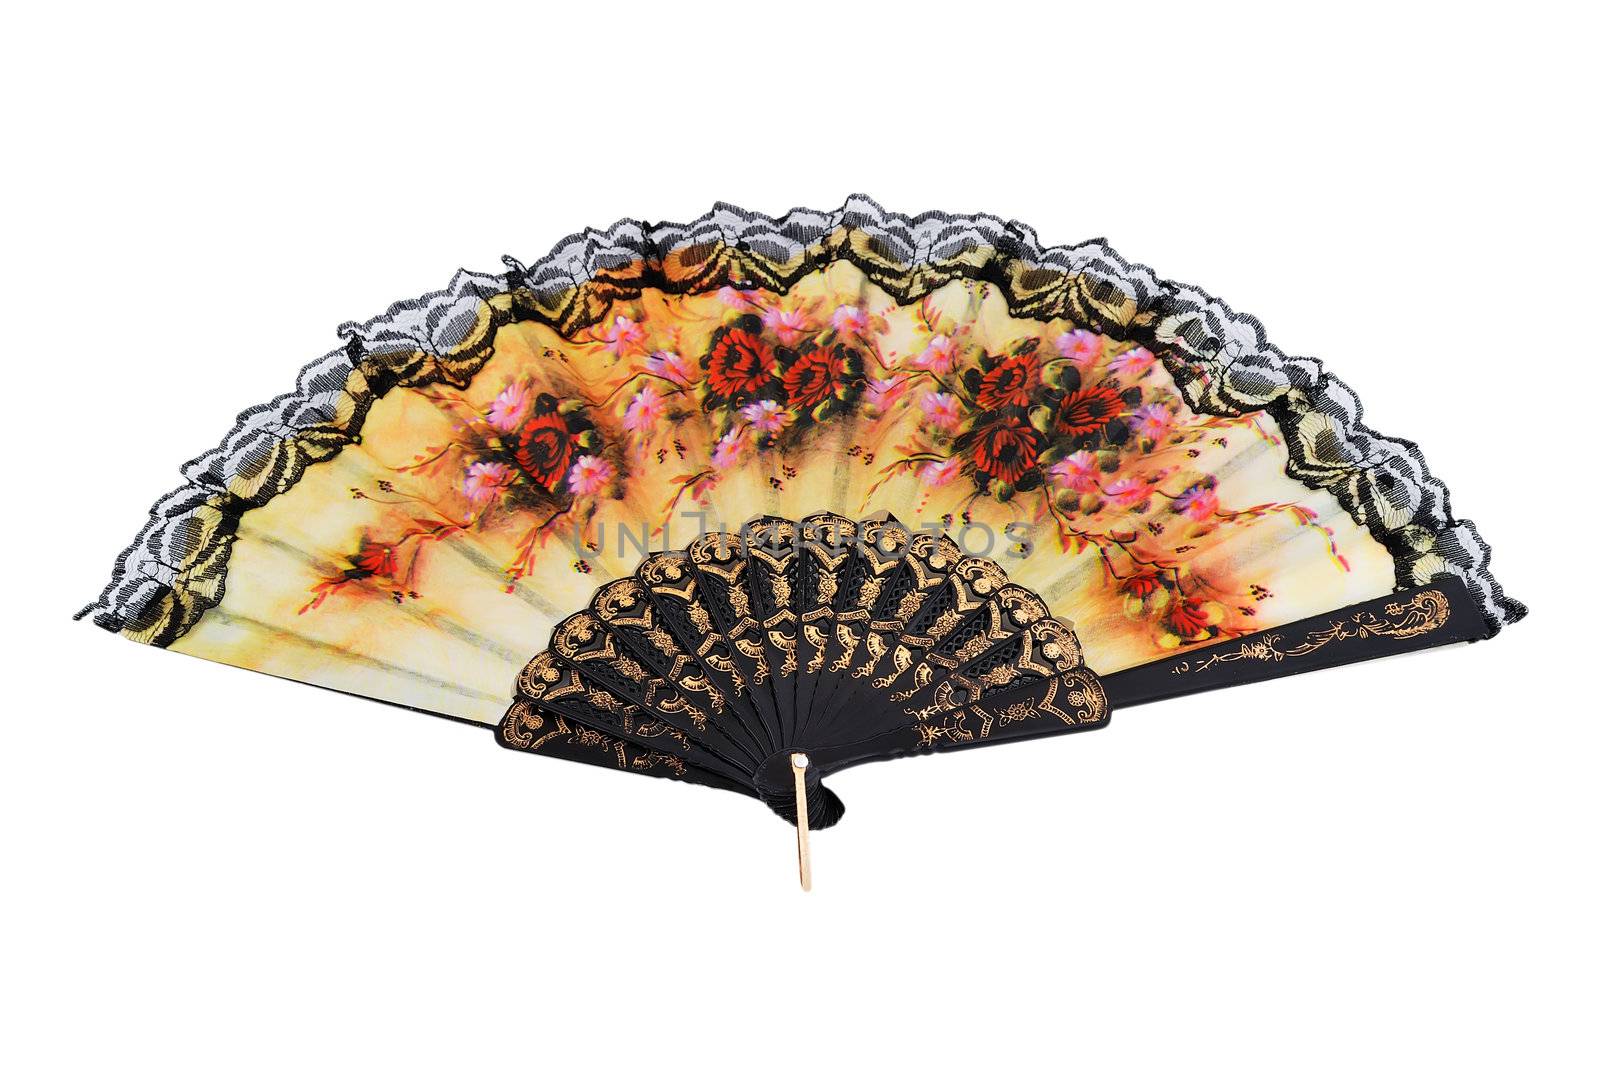 Chinese folding fan with a white background